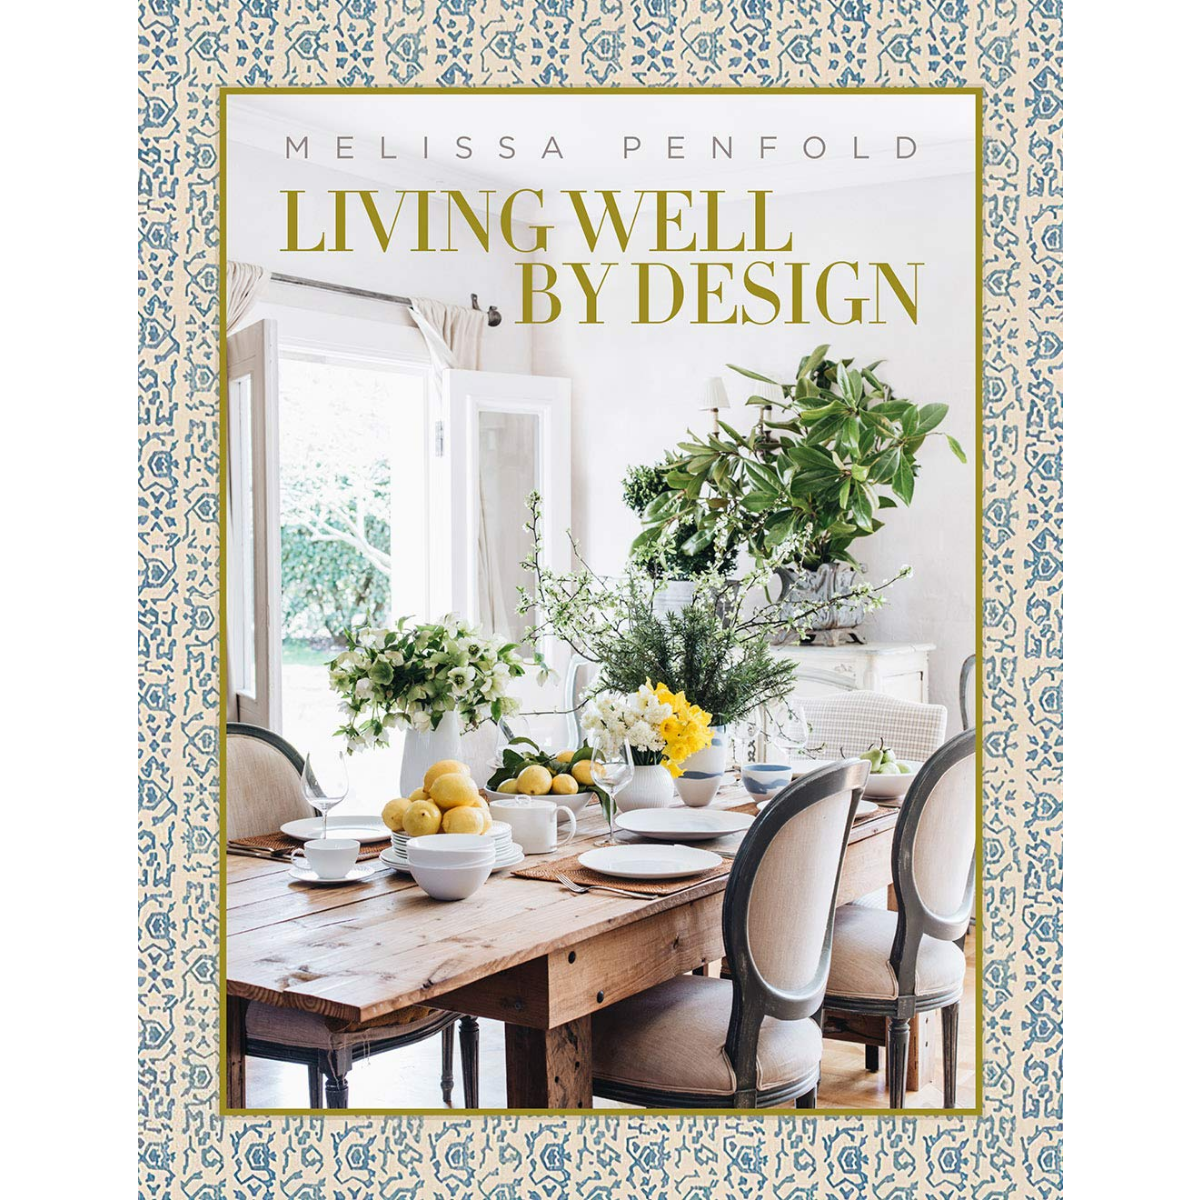 Living Well By Design by Melissa Penfold